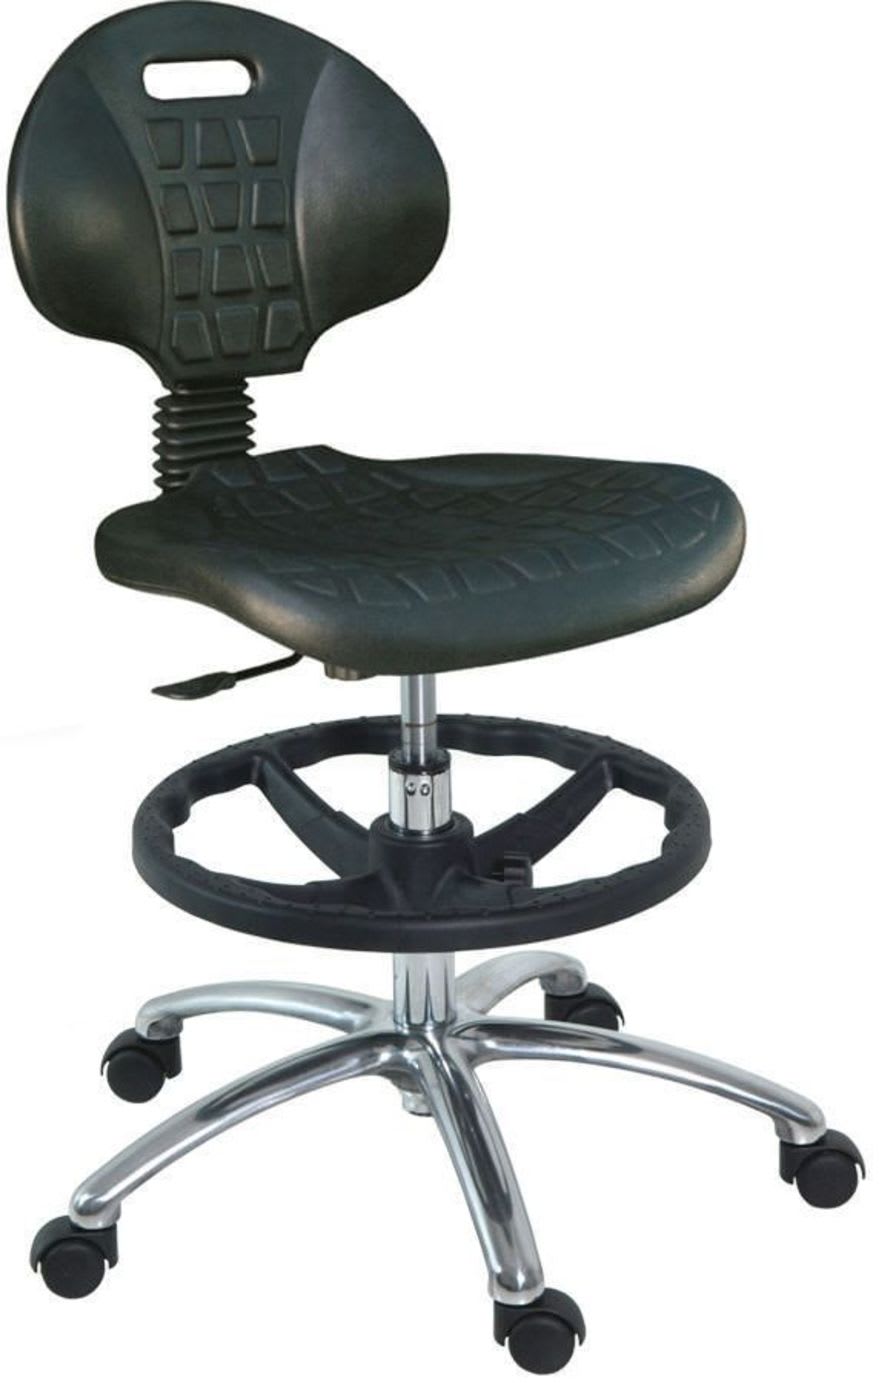 Medical stool / on casters / height-adjustable / with backrest H-196 Hidemar